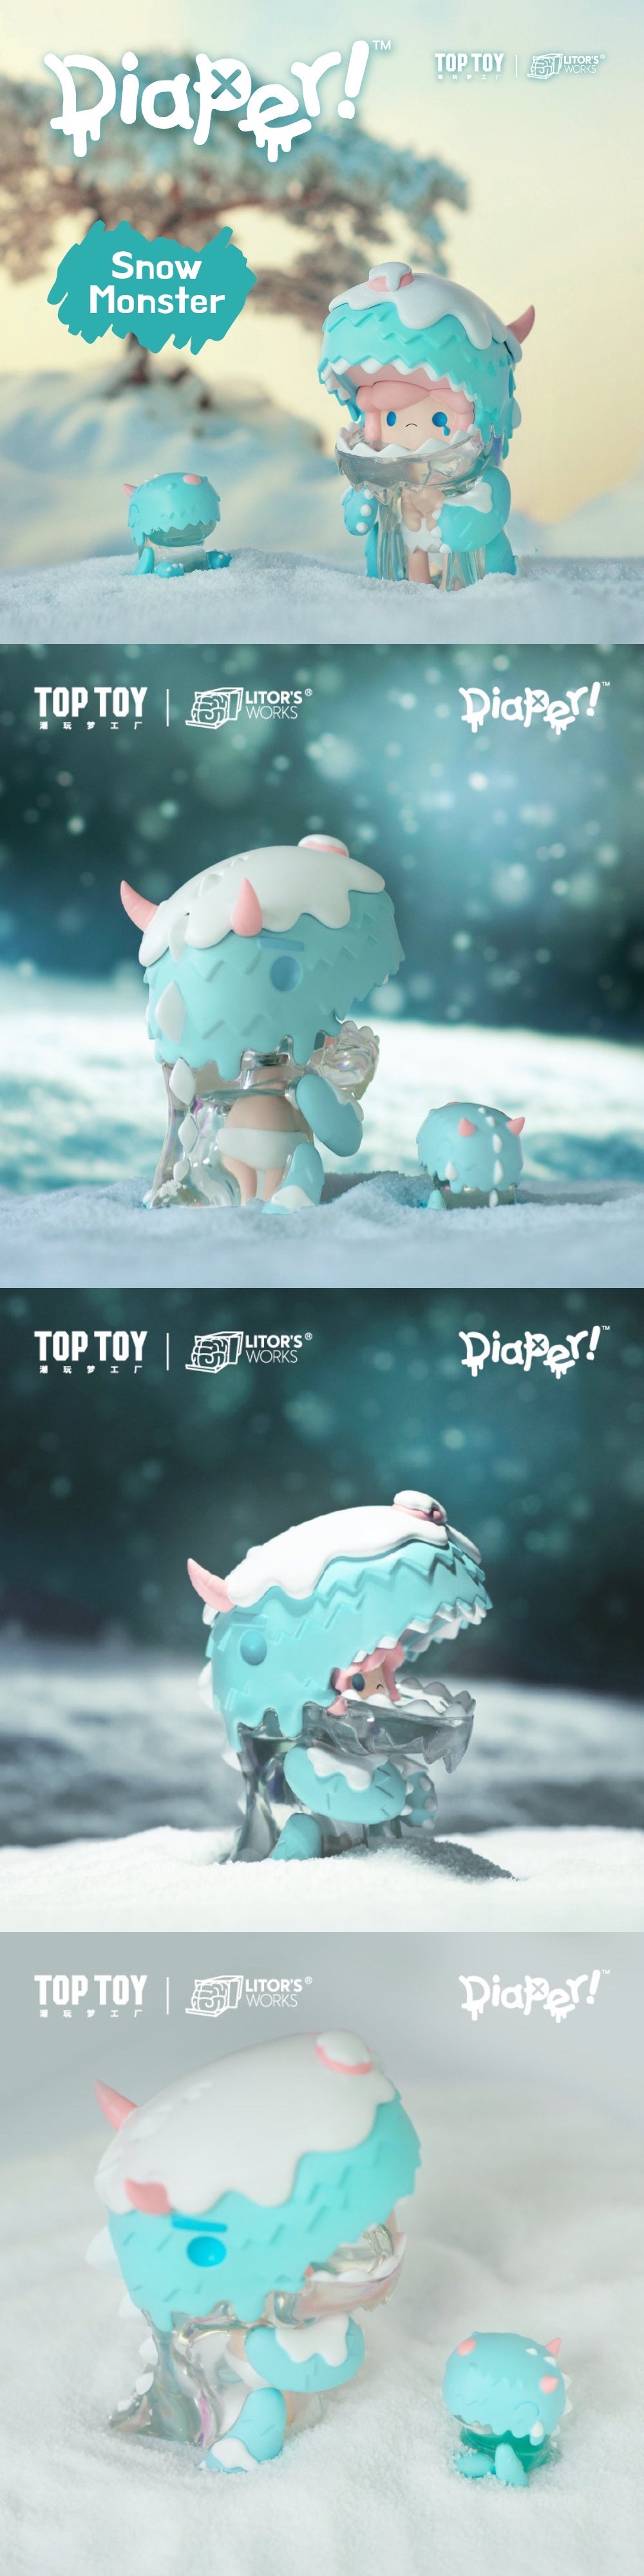 Litor‘s Works  Umasou! Diaper！Snow Monster Collectible Figurine